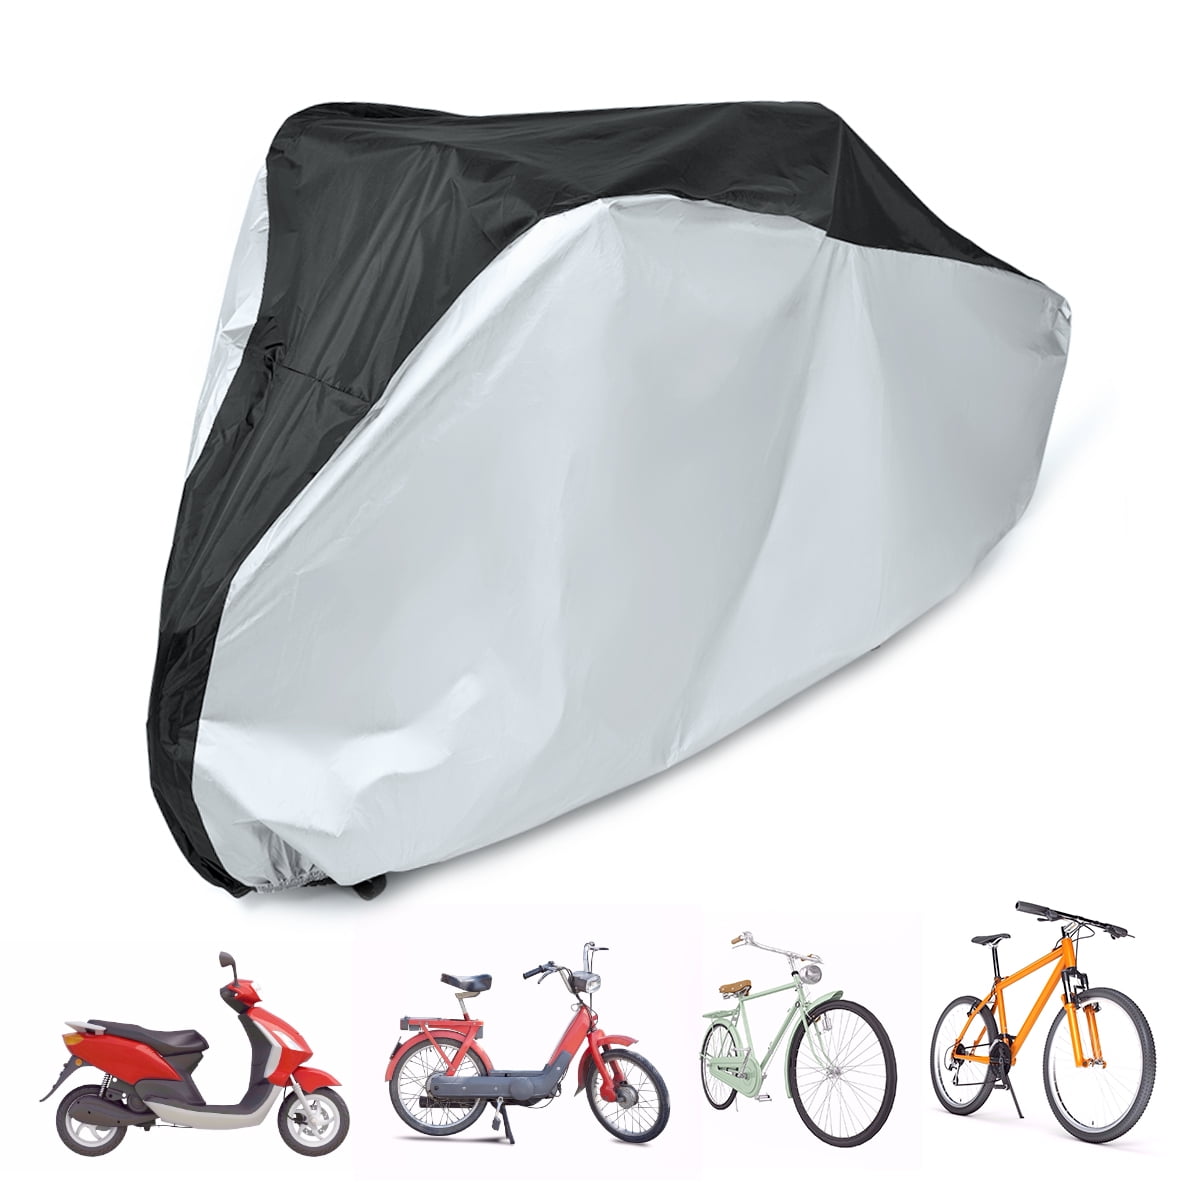 Cegduyi Styleest Bicycle Cover Outdoor Waterproof Dustproof Portable Foldable Bike Cover for outside storage 